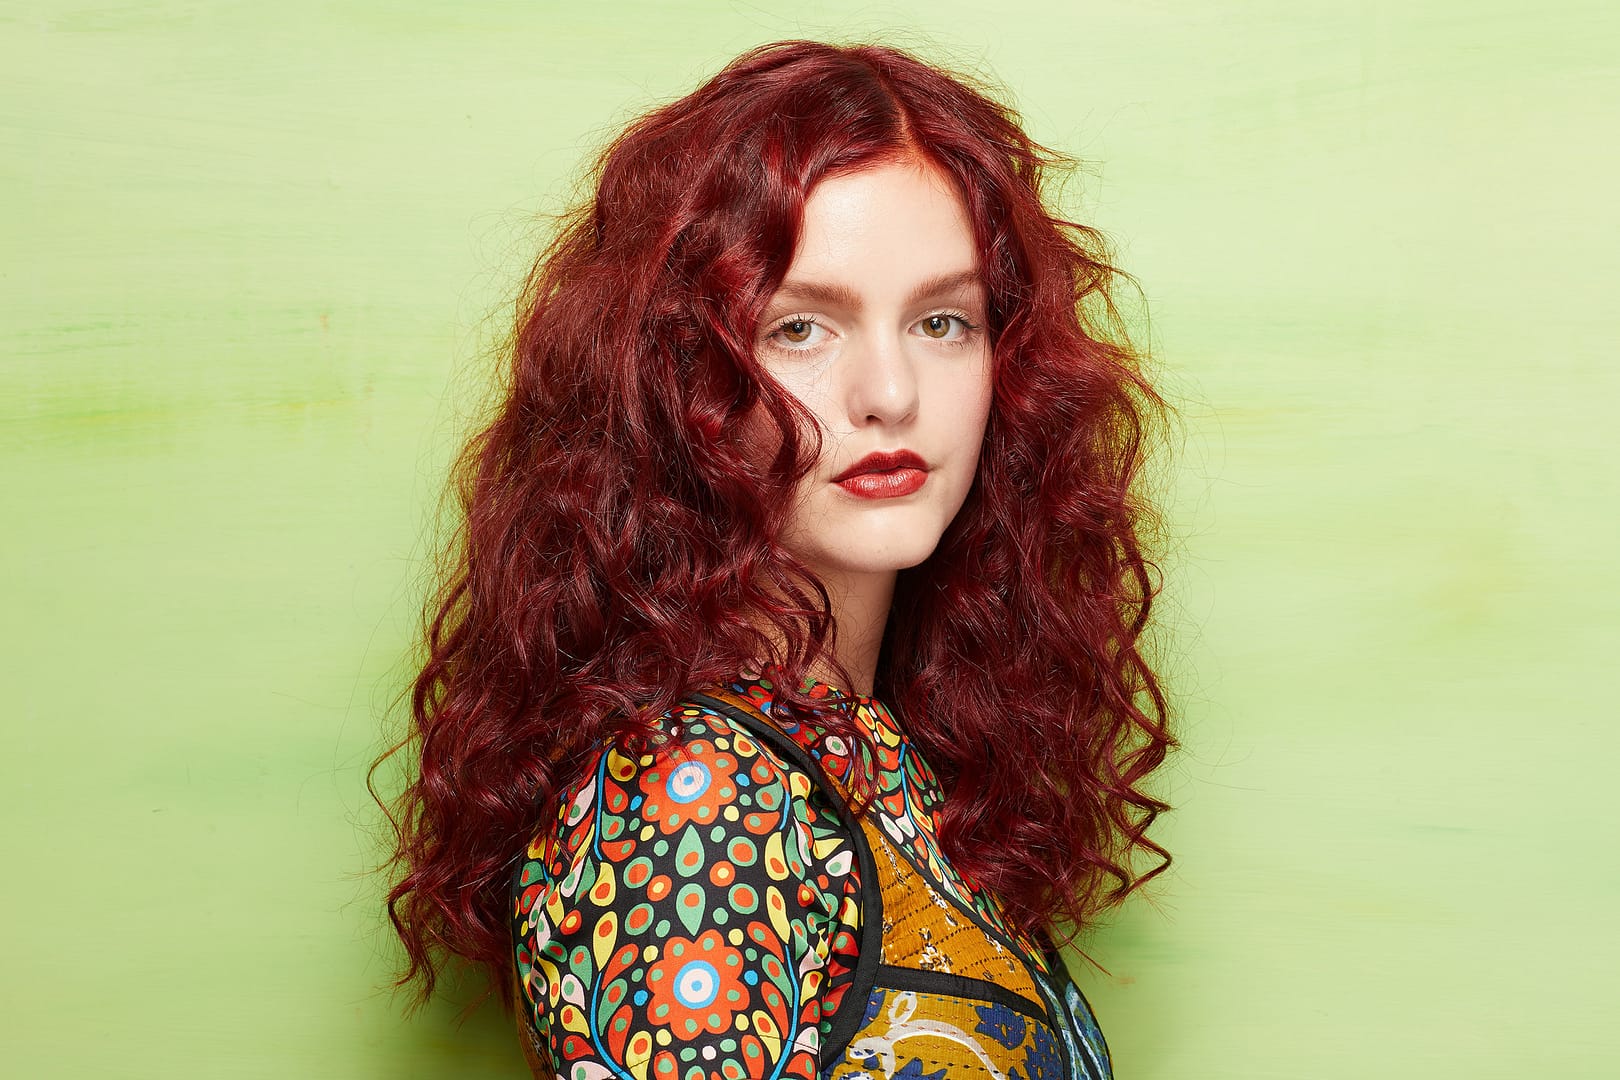 Young woman with curly red colored hair